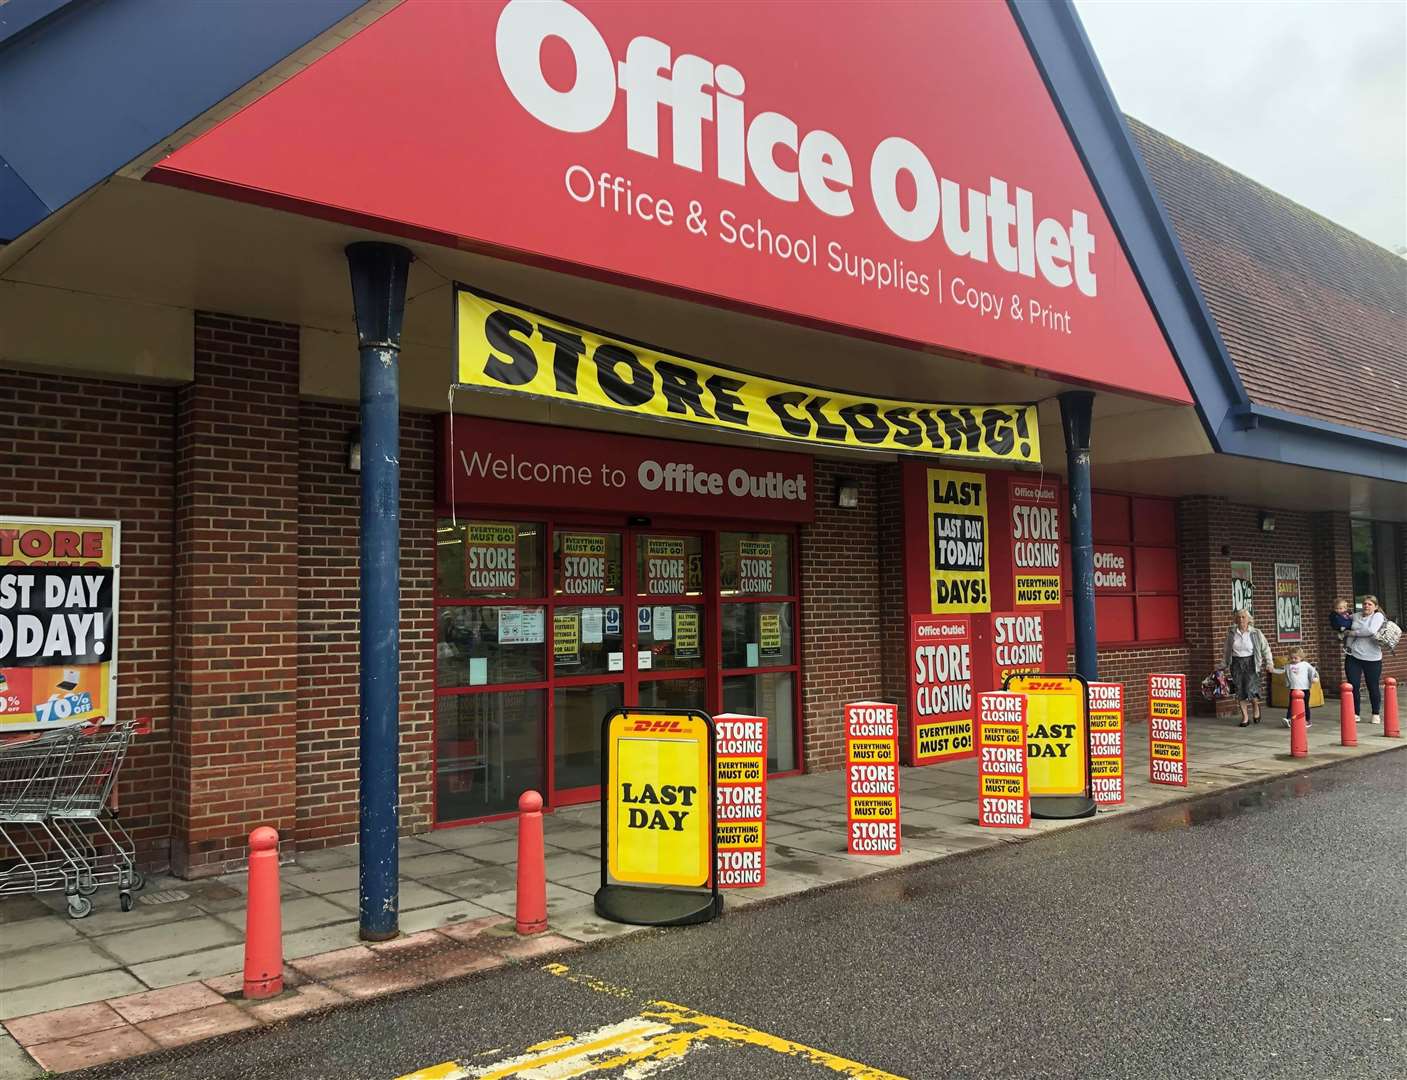 Office Outlet closed its Ashford site in 2019